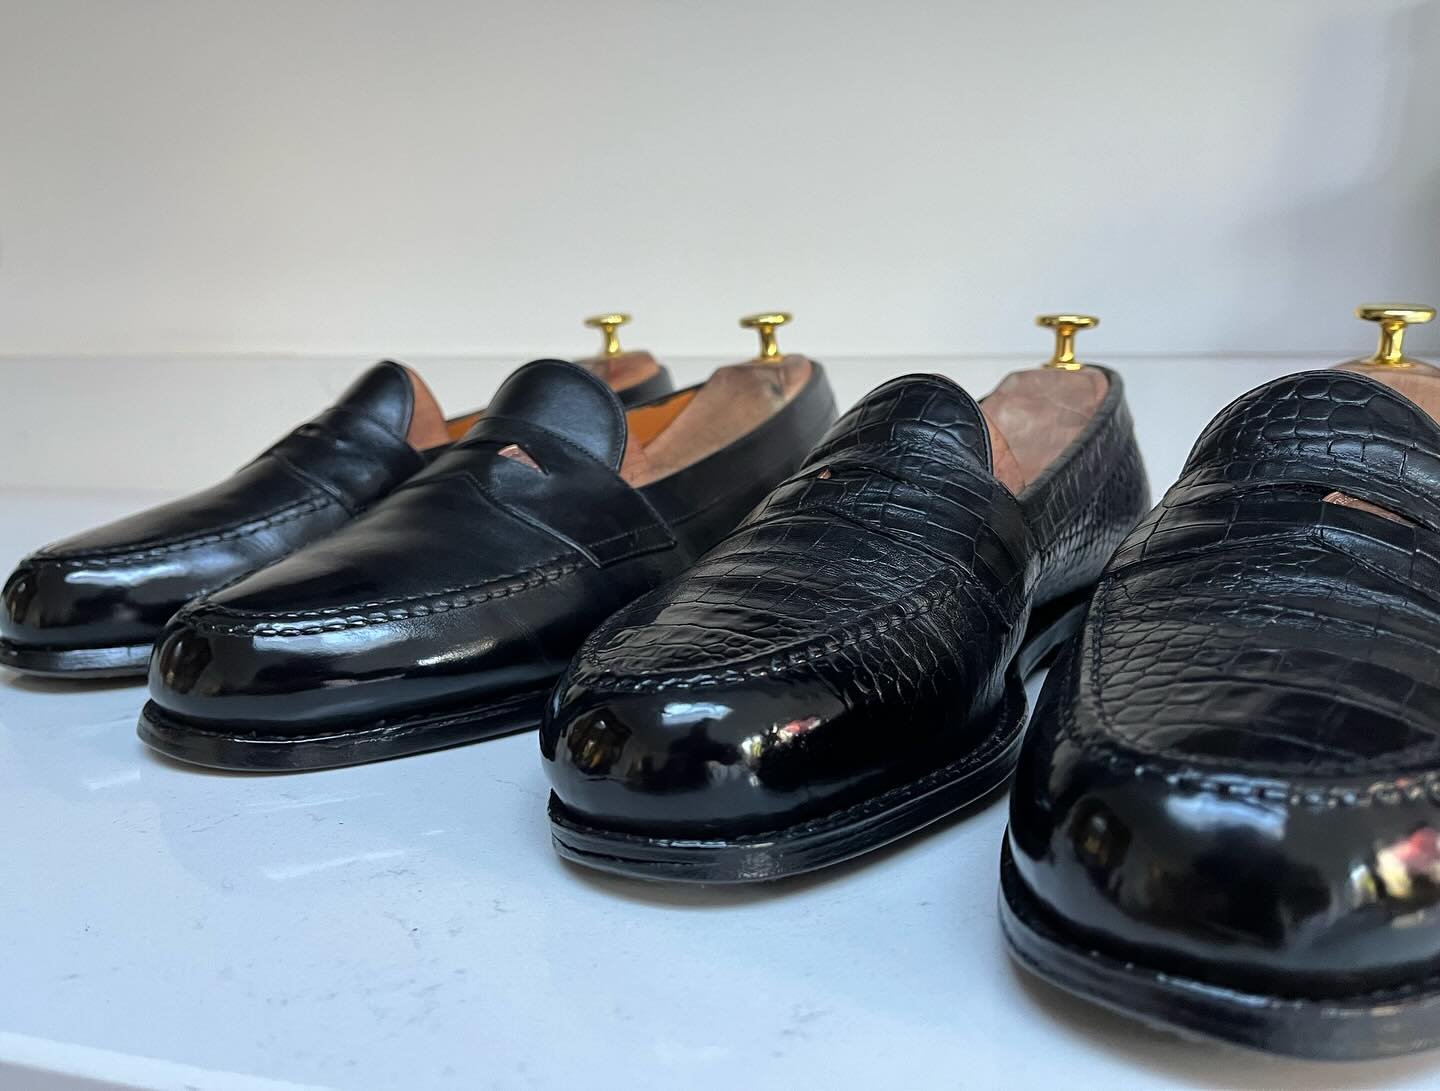 Mirror shine renovation for two pairs of @horatiofootwear penny loafers! We even took @brasso_uk to the pennies - it&rsquo;s all in the detail!

Exclusively using @saphir_medailledor 

#shoeshine #spitshine #shoecare #horatiofootwear #pennyloafers #s